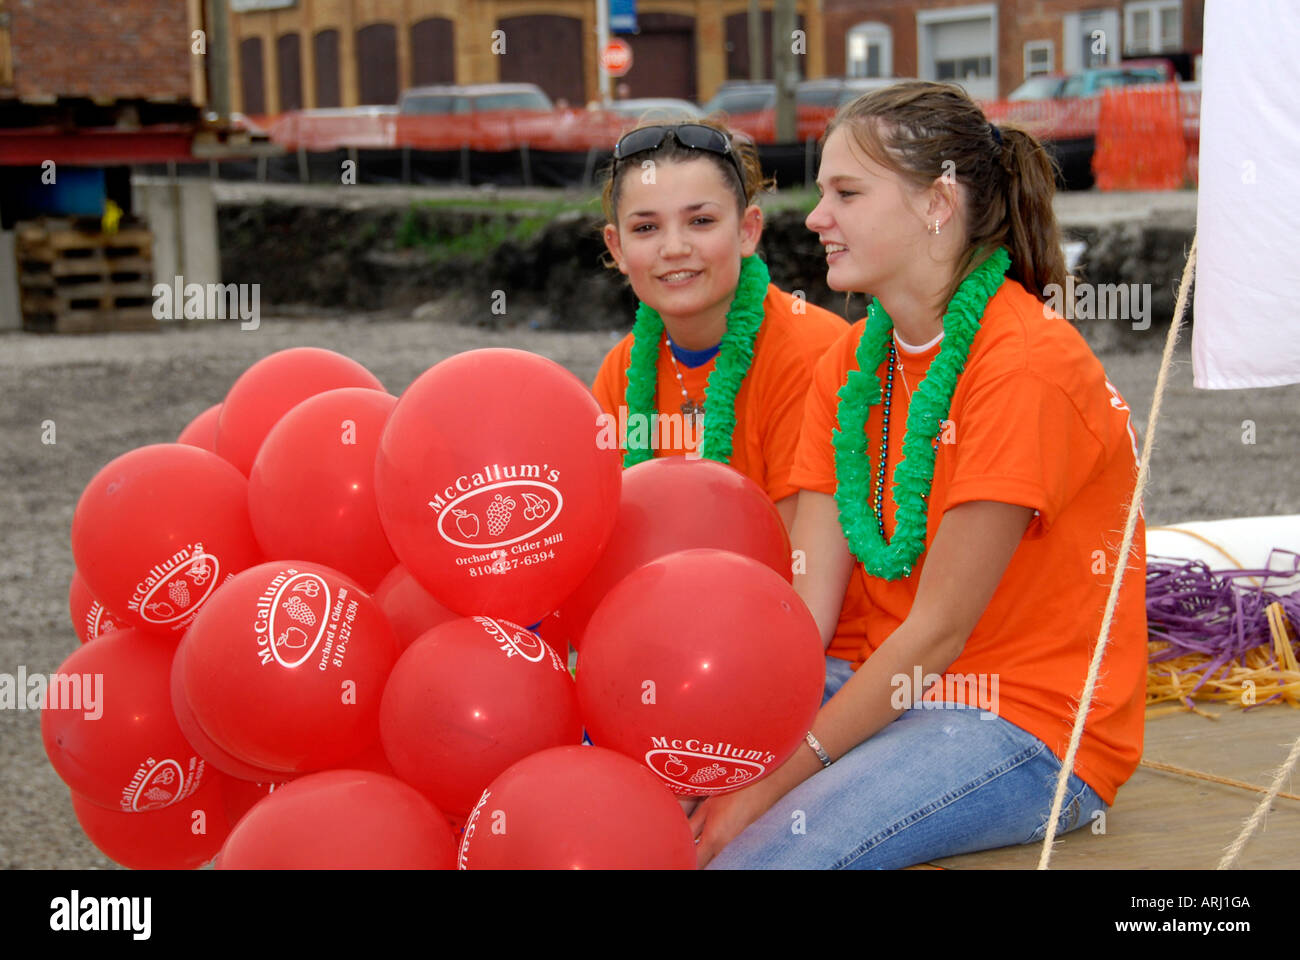 Teen girls sit talking to one another while giving away free red balloons Stock Photo